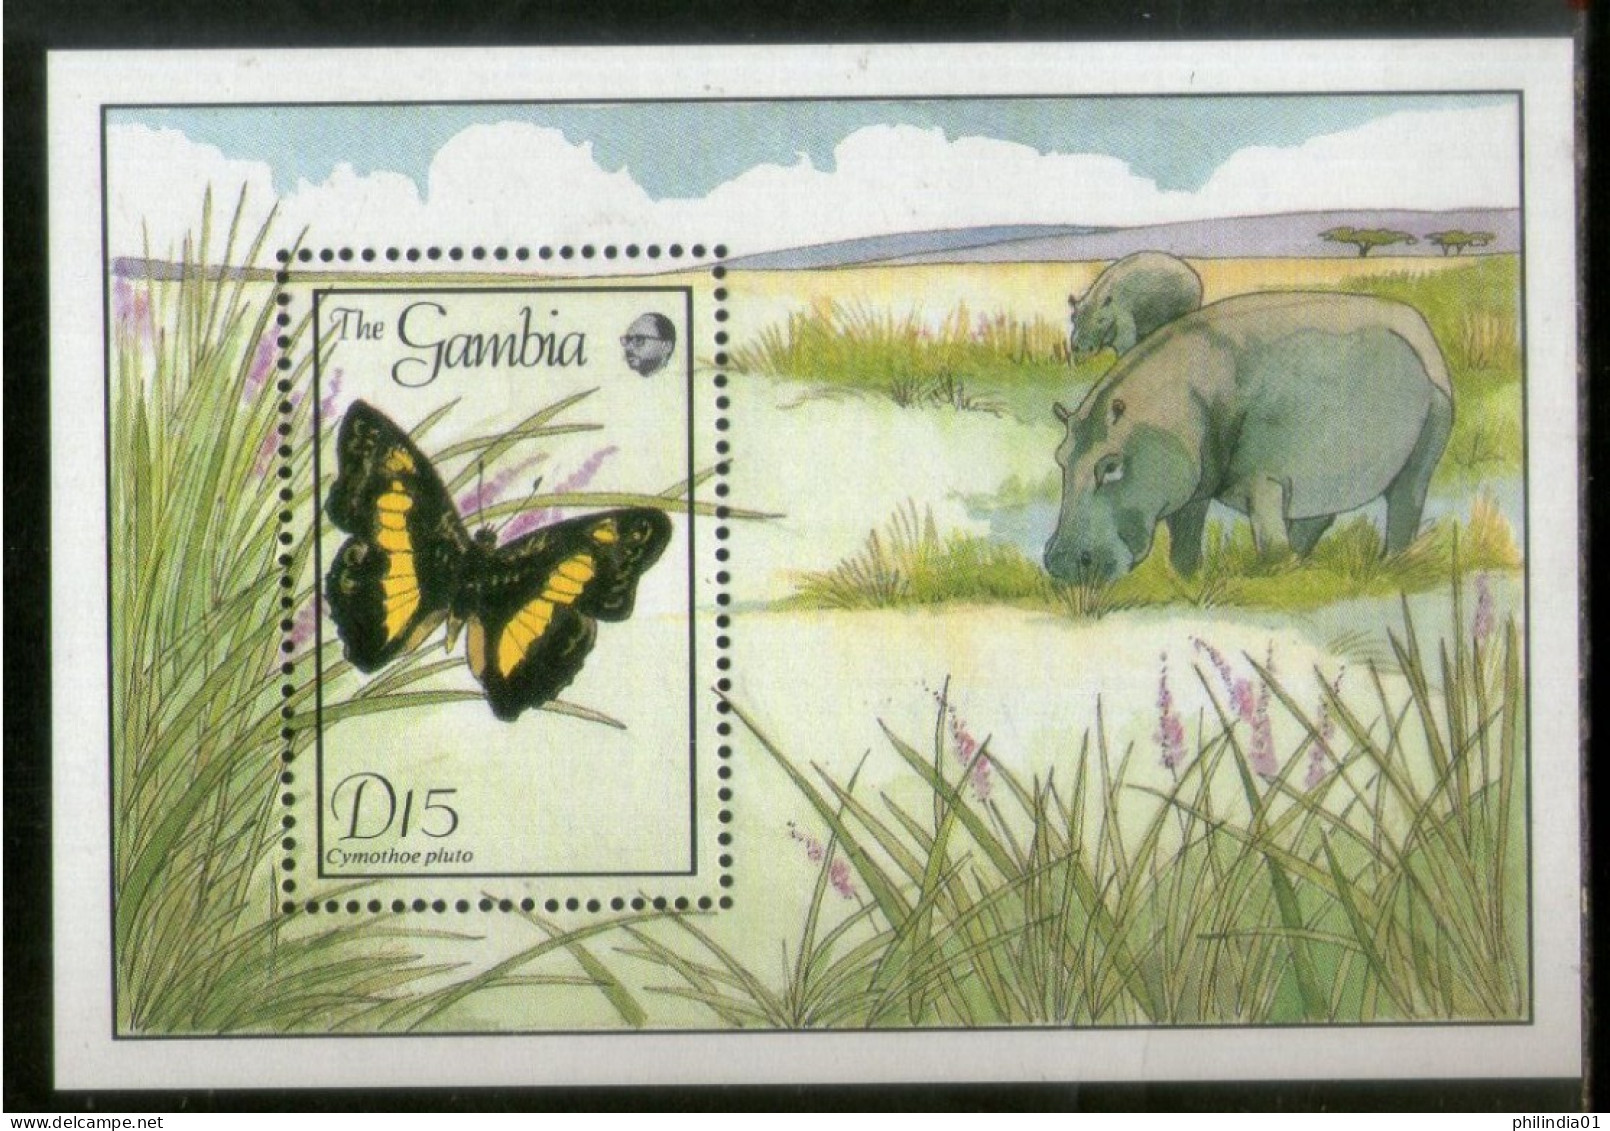 Gambia 1989 Butterflies Moth Insect Hippo Wildlife Animals Sc 845 M/s MNH # 1584 - Papillons